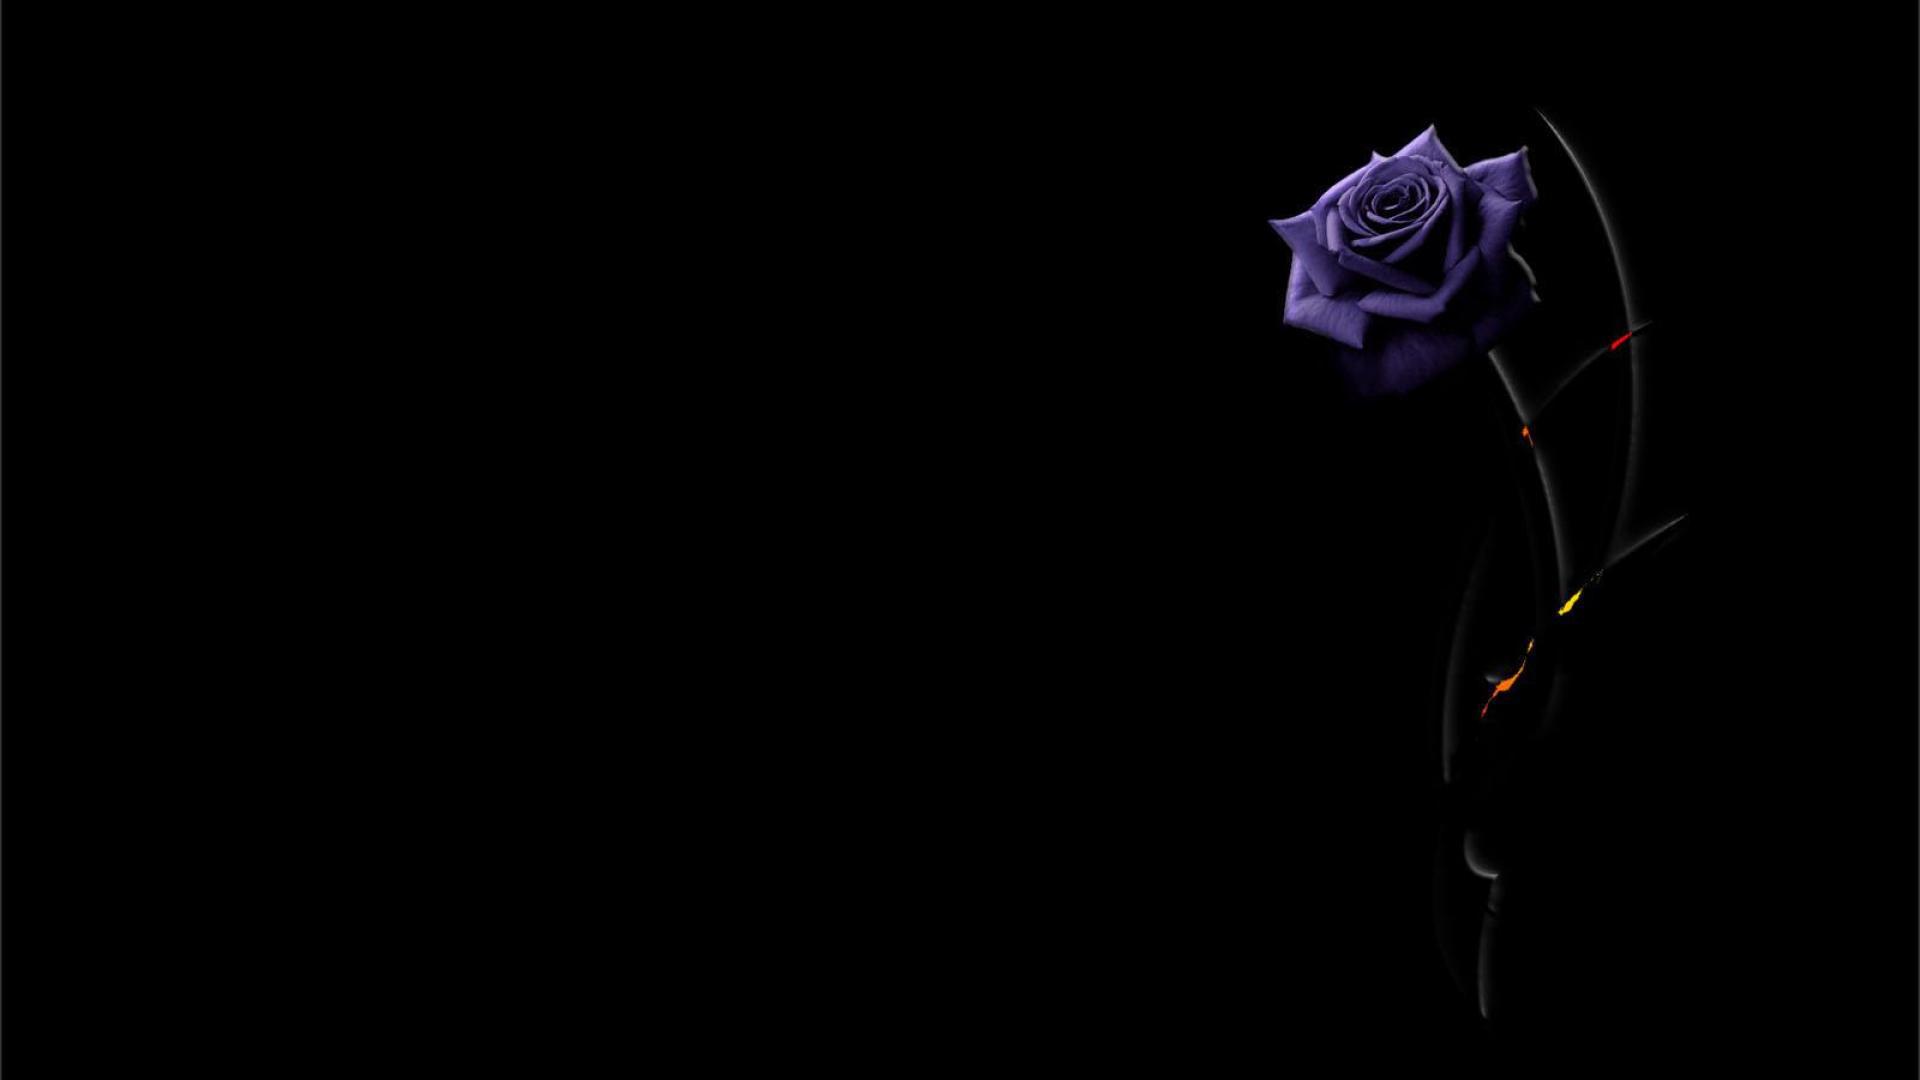 Beautiful purple rose on a black background wallpapers and images